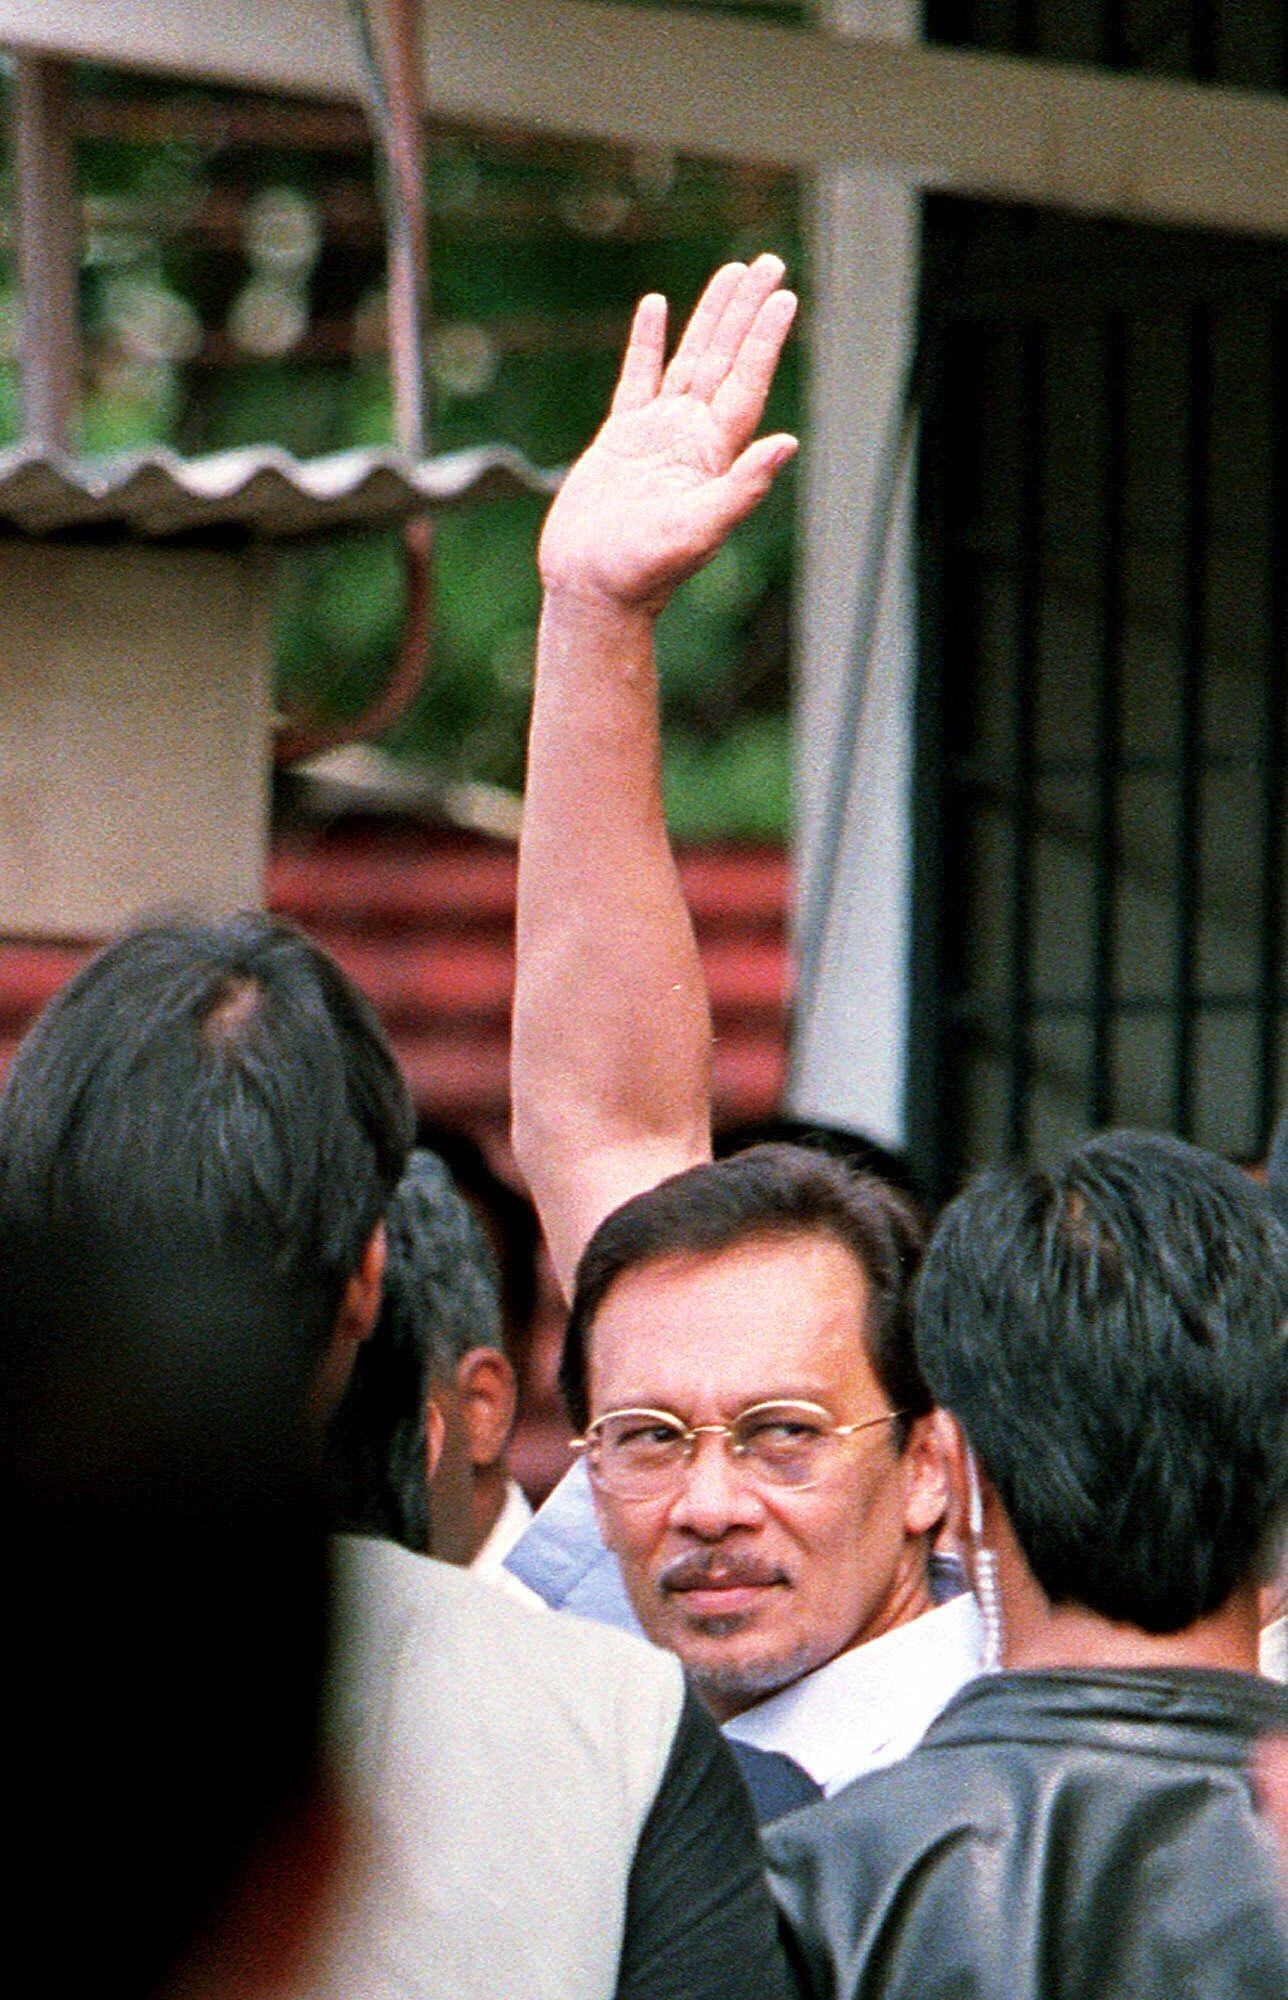 Anwar Ibrahim waves to supporters in Kuala Lumpur as he is led into court to be charged on September 30, 1998. File photo: AP